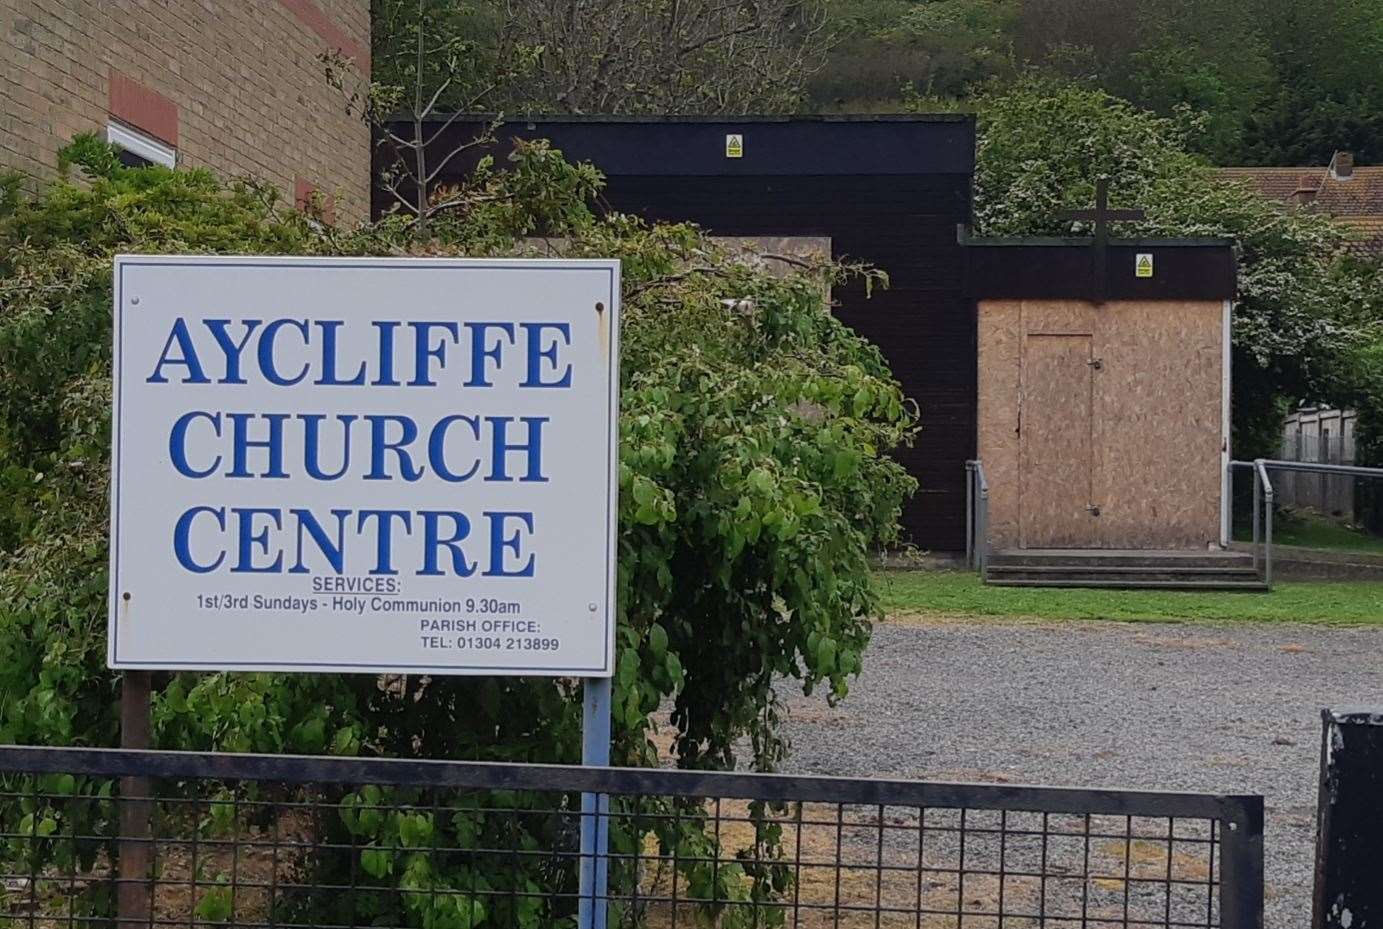 The former Aycliffe Church Centre, which closed in 2020, could be demolished